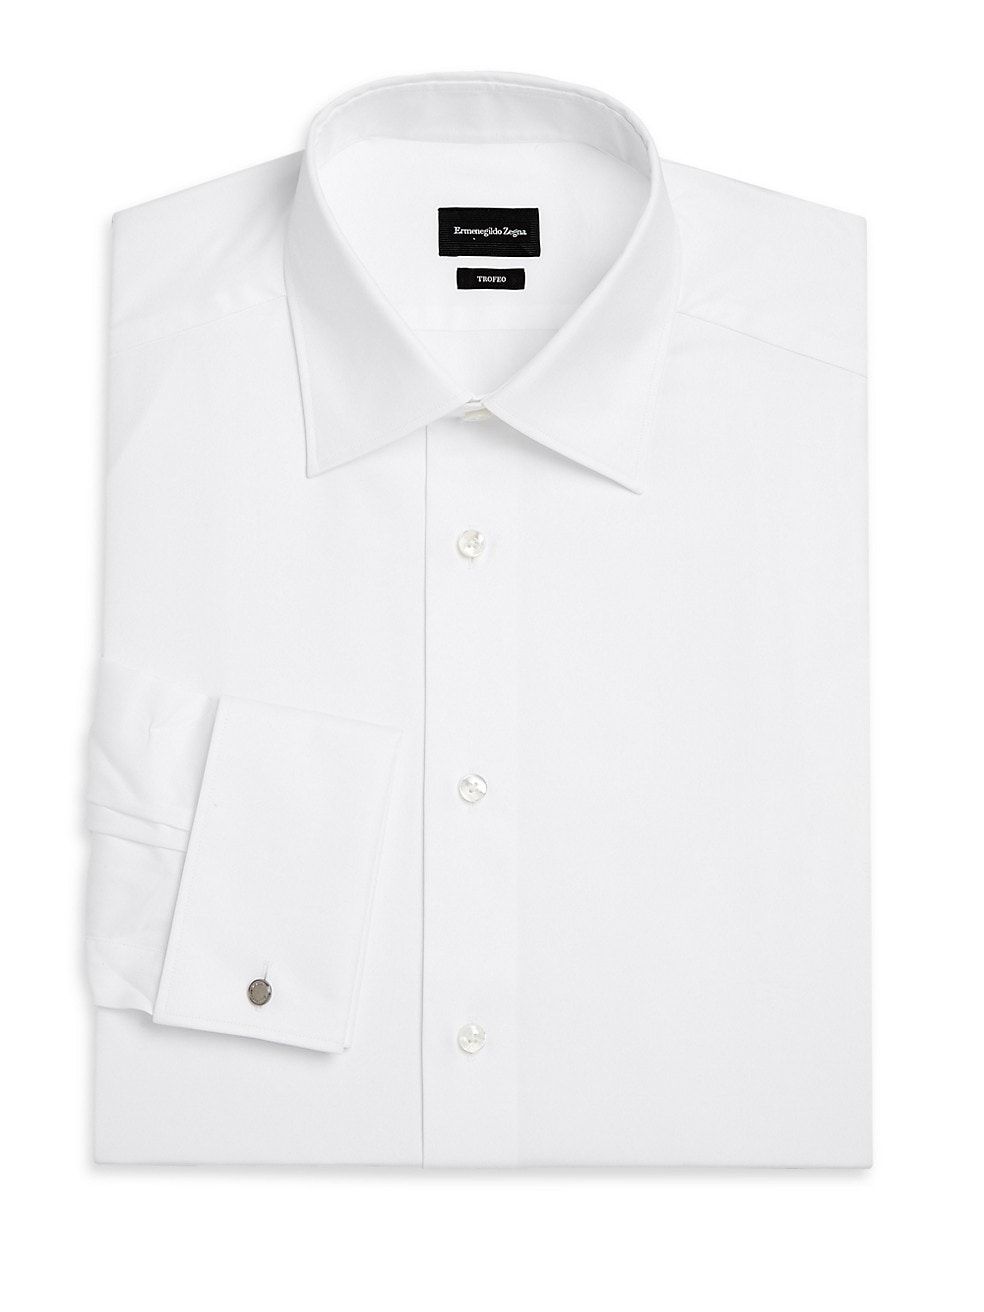 The Best White Dress Shirts Will Make You Look Like the Boss You Are